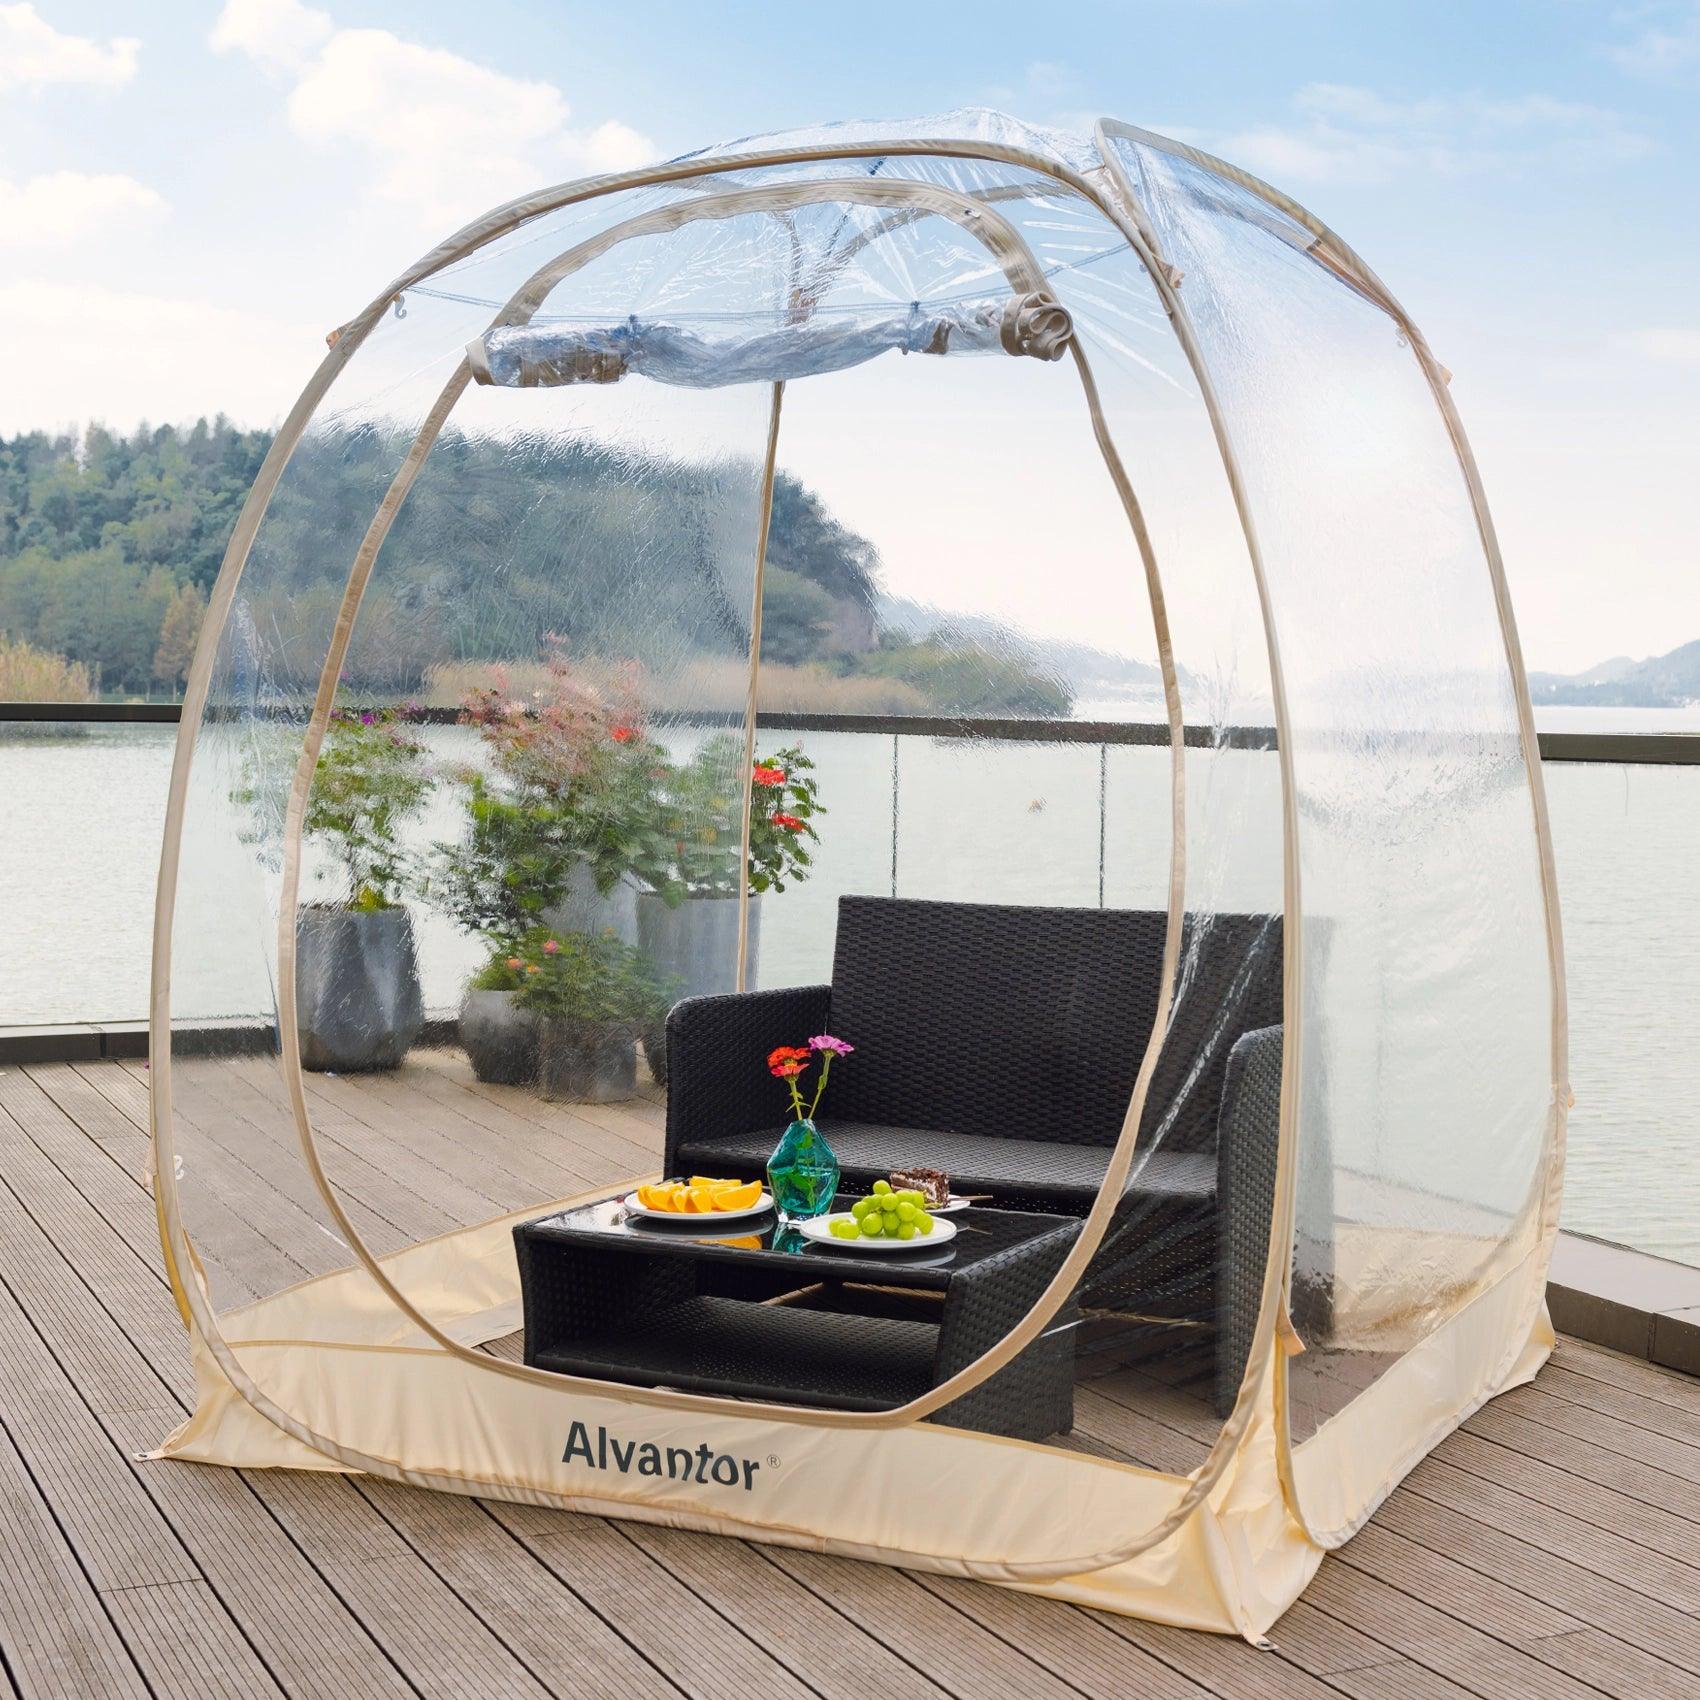 6'x6' bubble tent with garden sofa inside